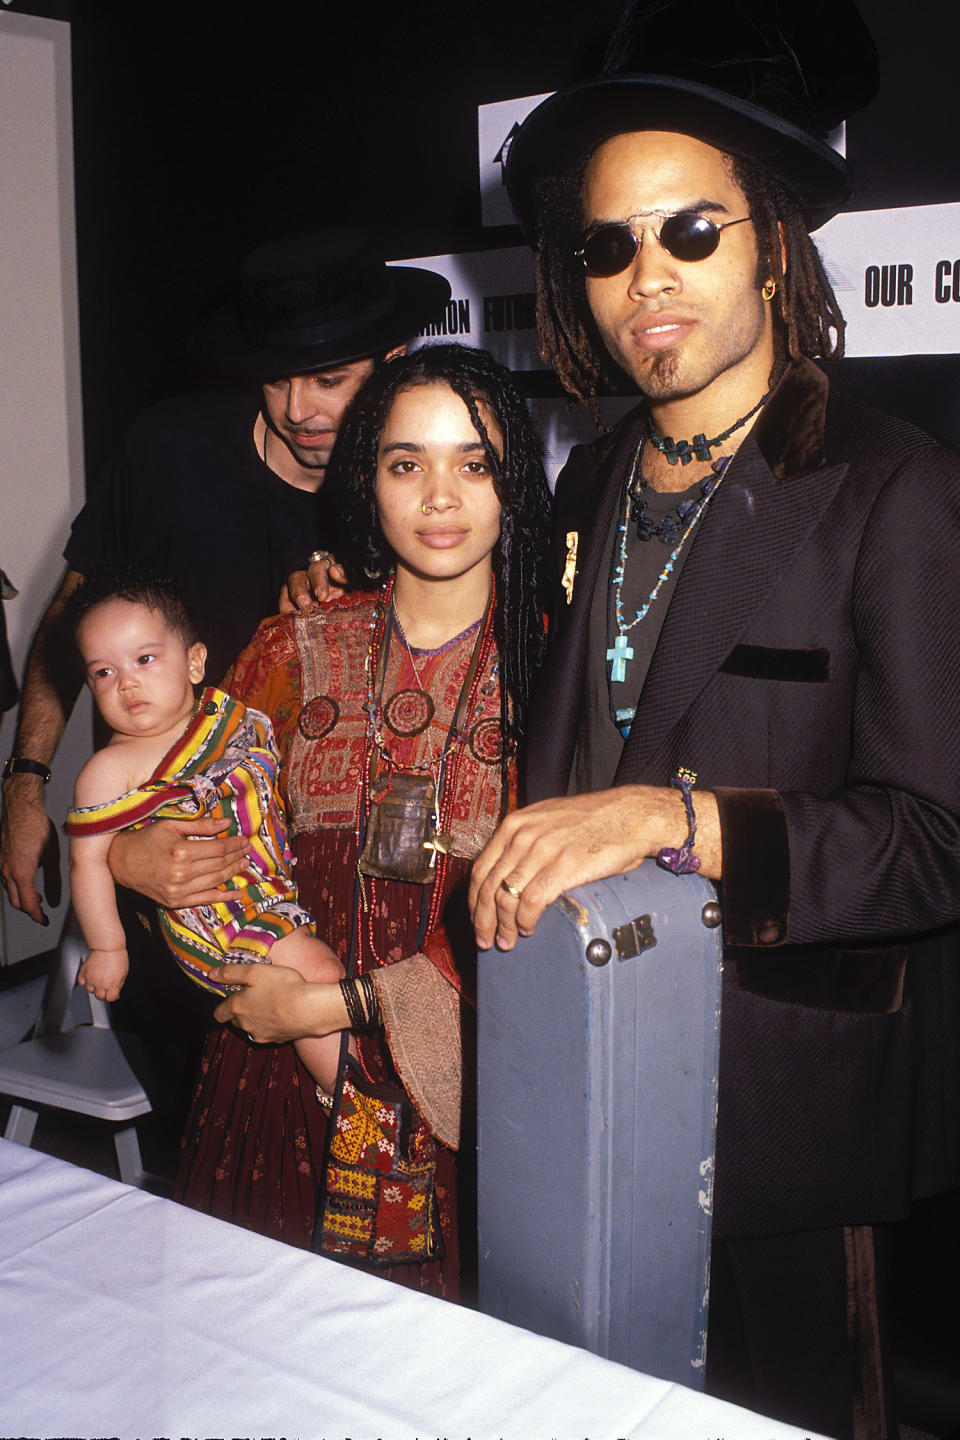 Lenny Kravitz with wife Lisa Bonet and daughter Zoe at a press conference in Lincoln Center, NYC 1989 (Vinnie Zuffante / Getty Images)